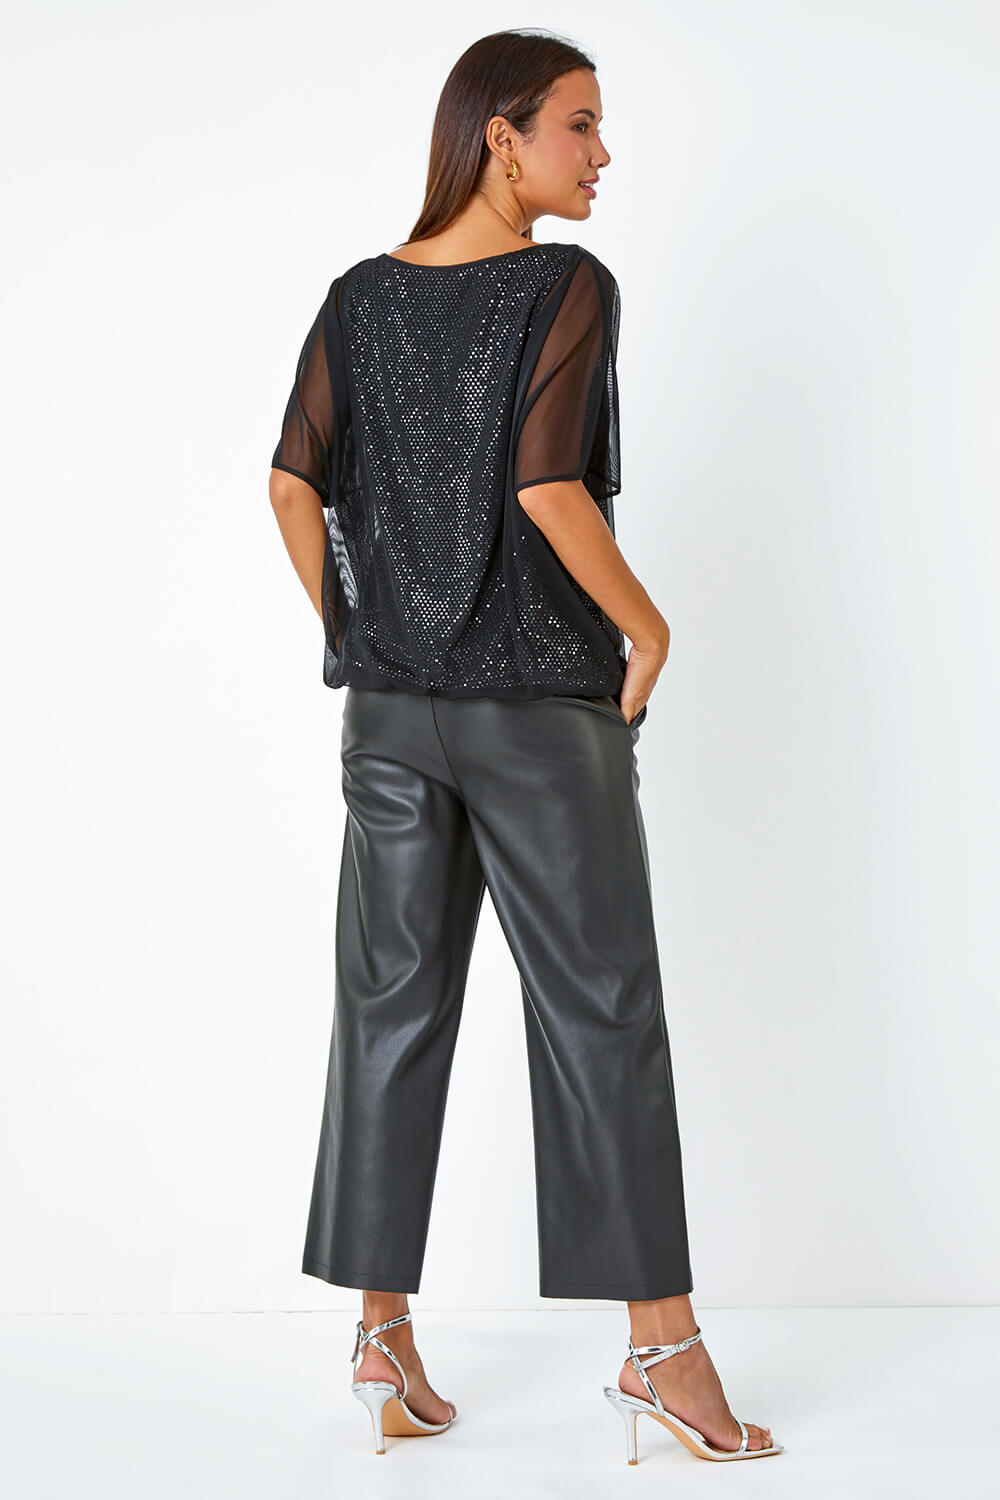 Black Sparkle Mesh Stretch Overlay Top, Image 3 of 5